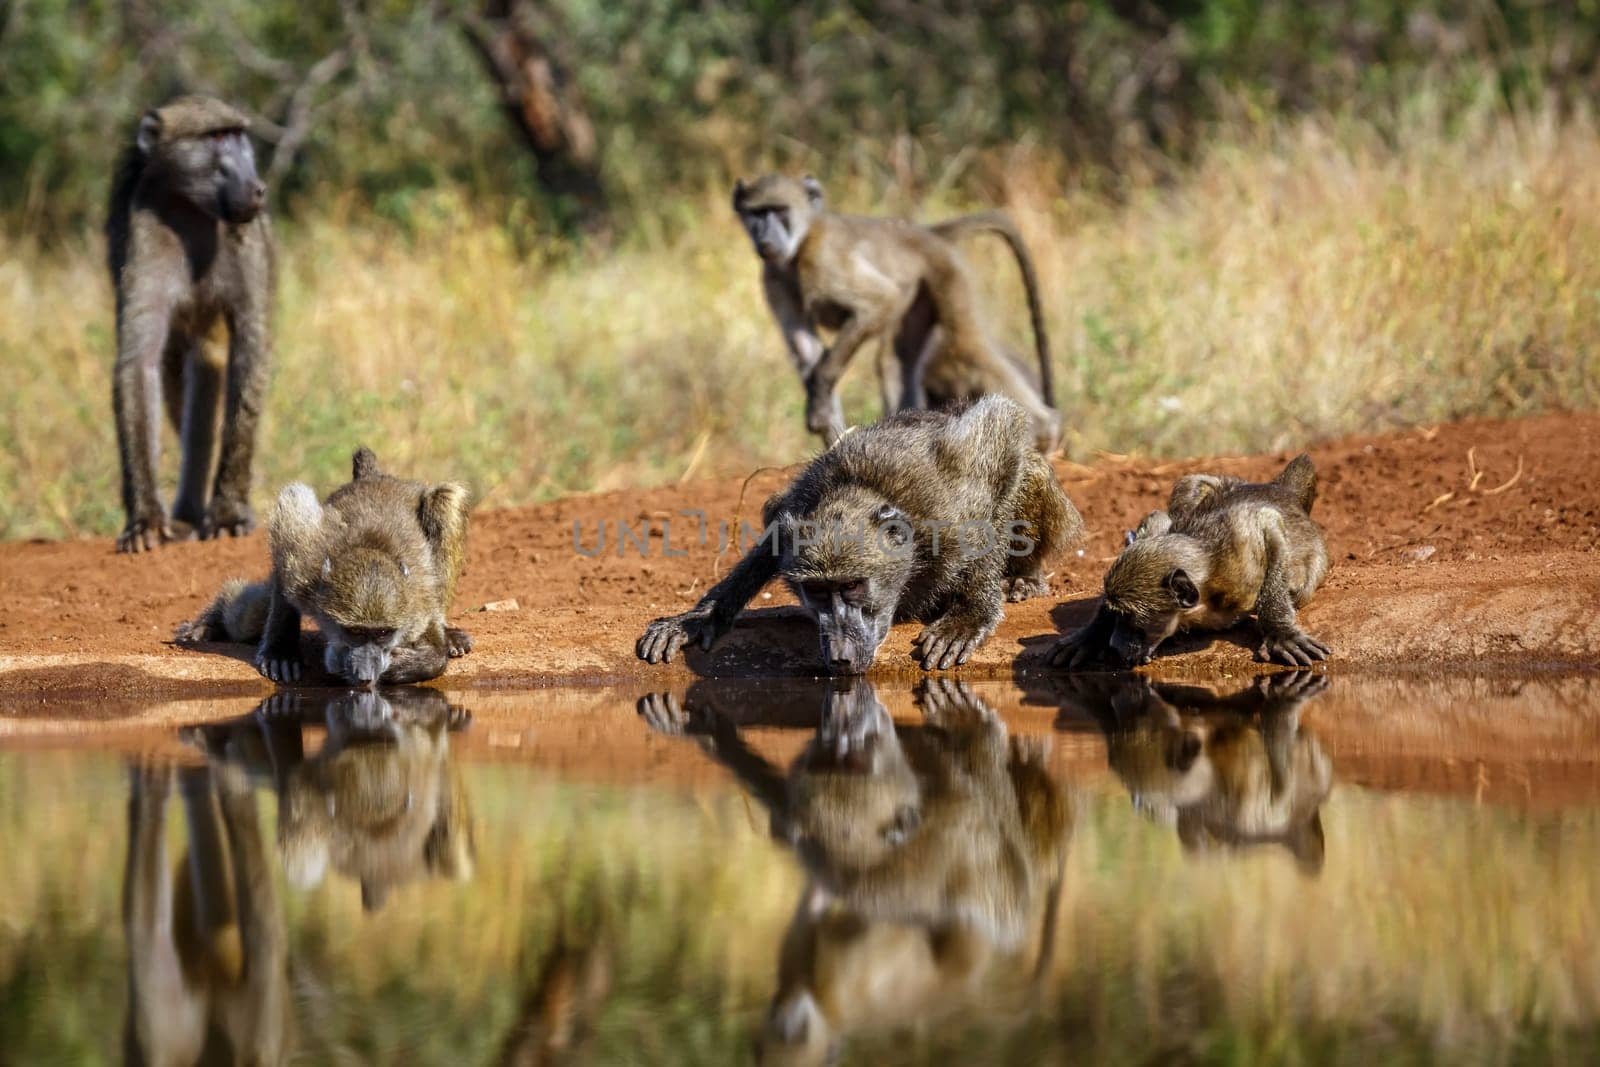 Chacma baboon family drinking in waterhole in Kruger National park, South Africa ; Specie Papio ursinus family of Cercopithecidae